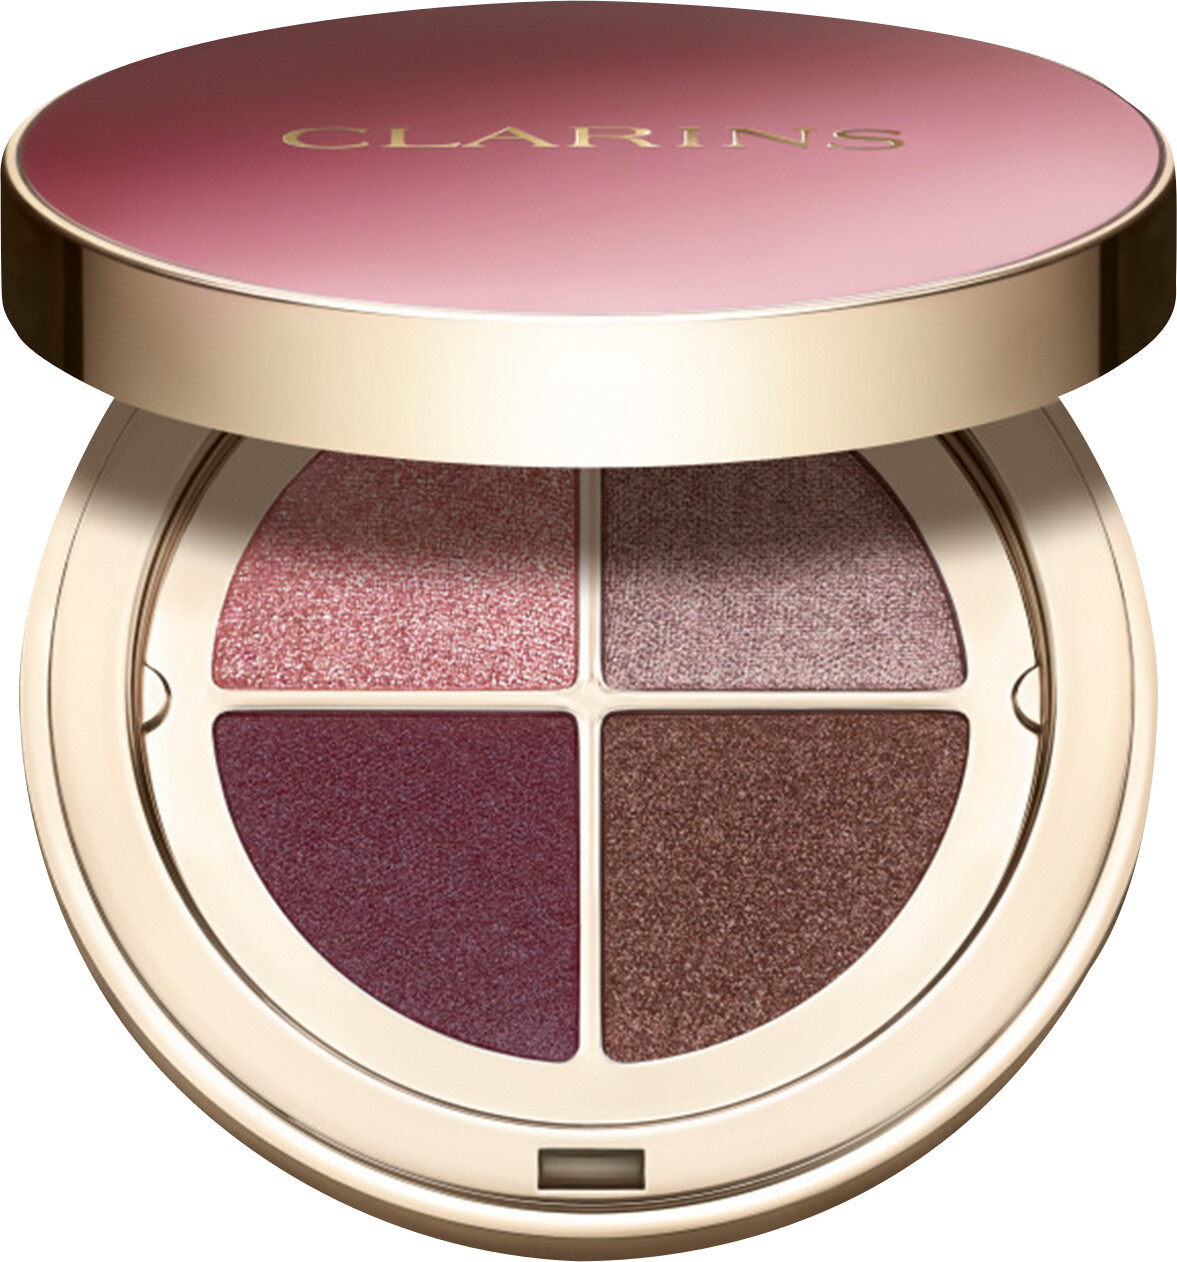 Køb Clarins 4-Colour Eyeshadow Palette 01 Fairy tale nude 